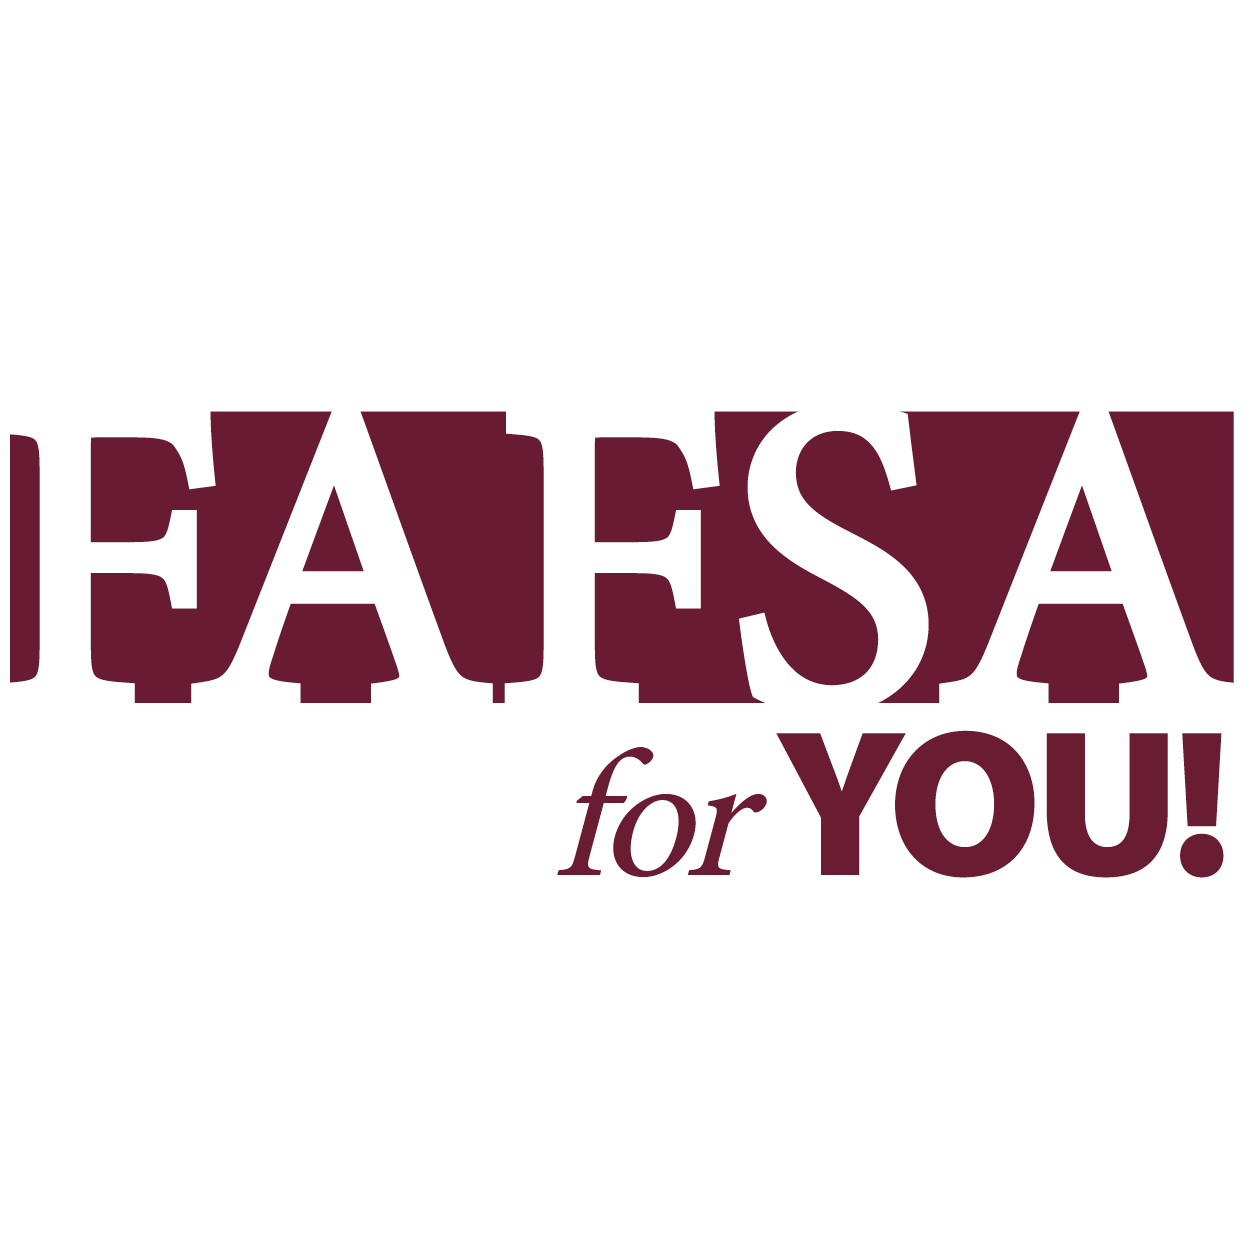 FAFSA For You